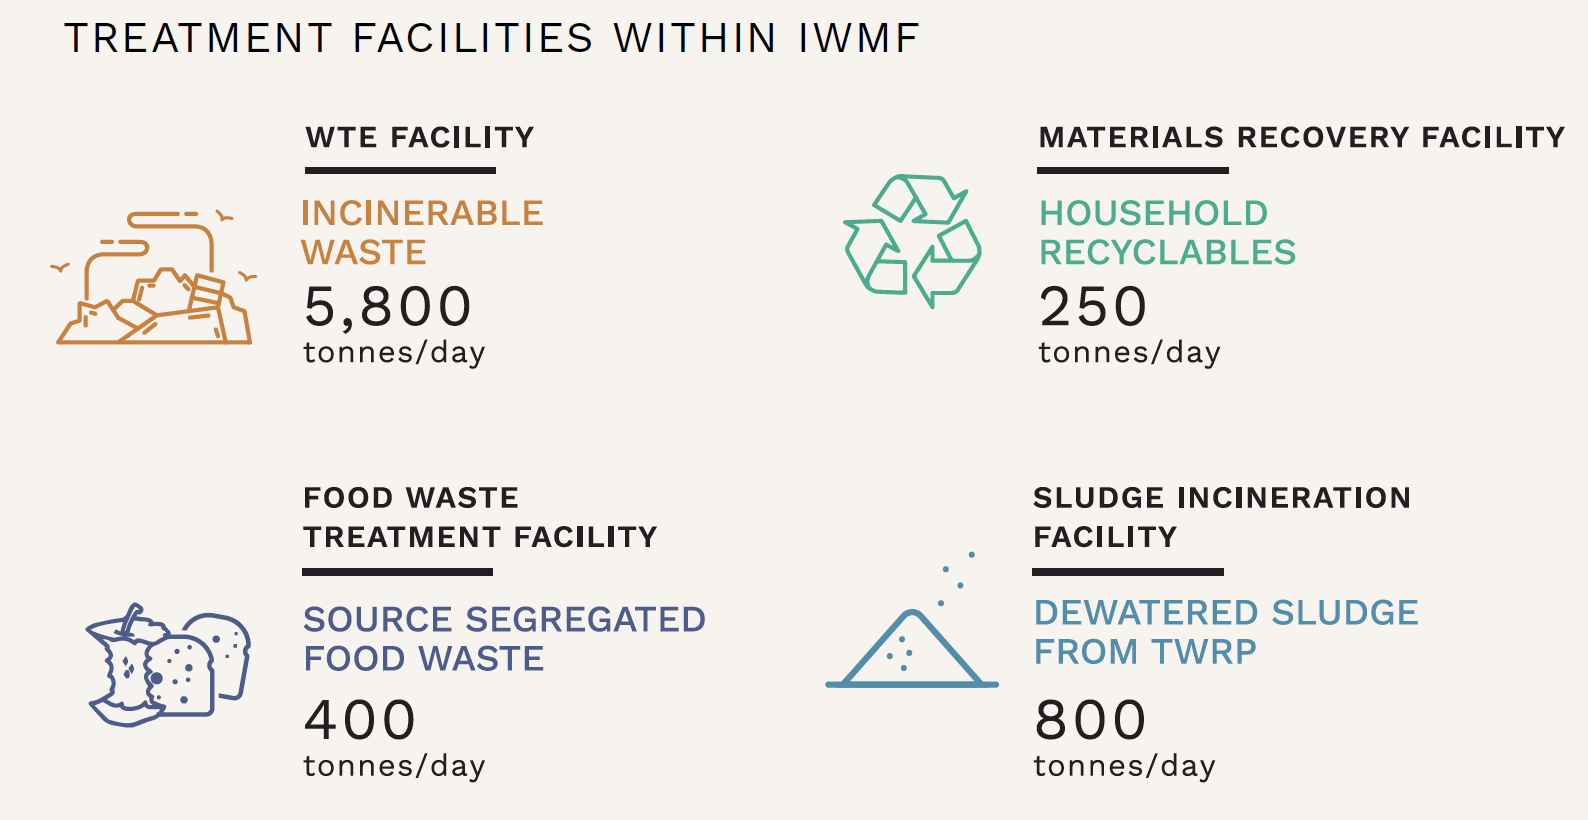 Integrated Waste Management Facility (IWMF)